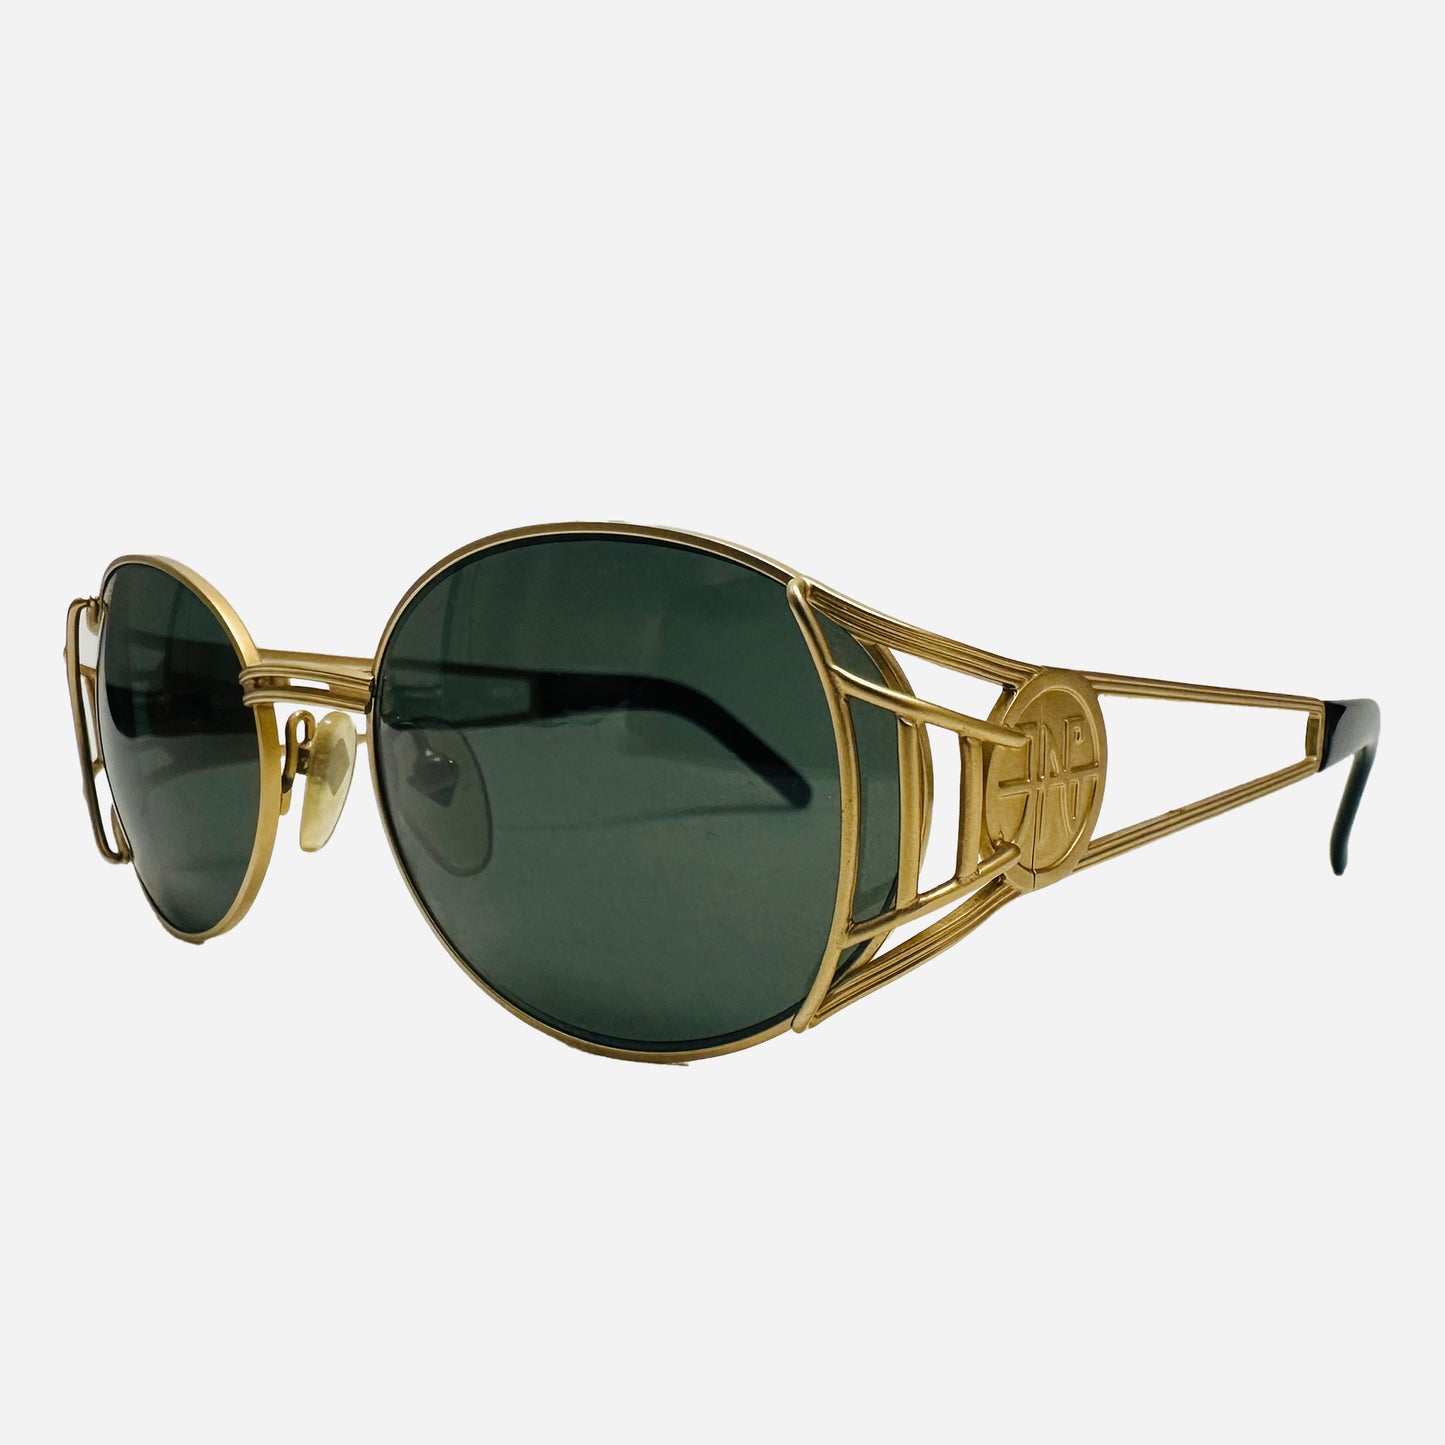 Vintage-Jean-Paul-Gaultier-Sonnenbrille-Sunglasses-Model58-6102-made-in-japan-the-seekers-sunglasses-front